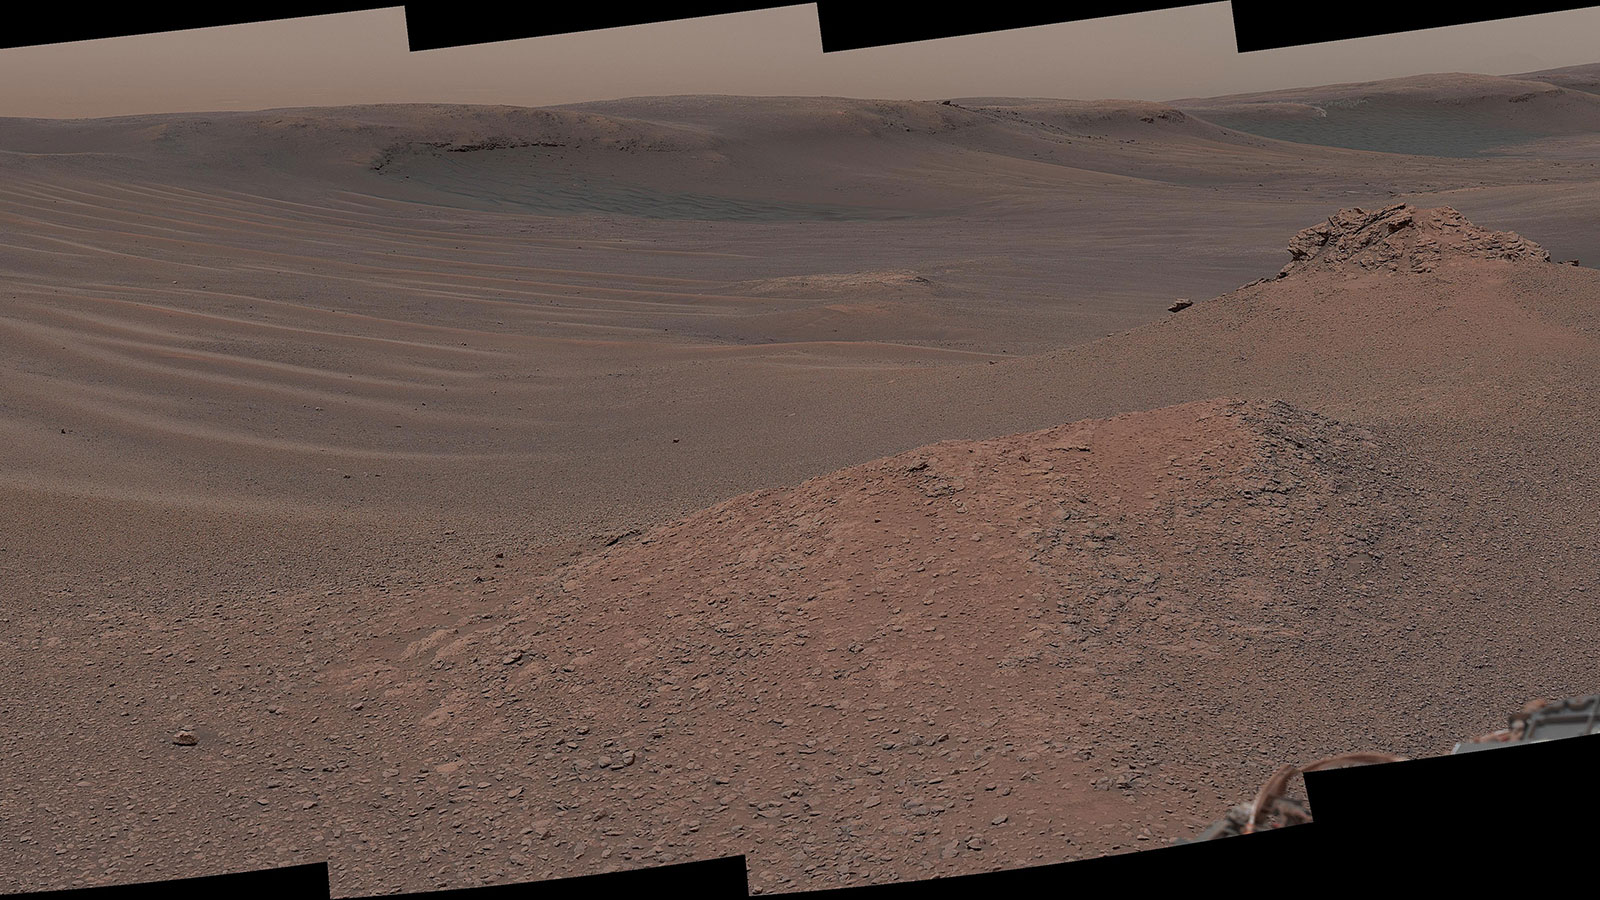 Mosaic captured by The Mast Camera (Mastcam) on NASA's Curiosity Mars rover, exploring the "clay-bearing unit" on Feb. 3, 2019 (Sol 2309).